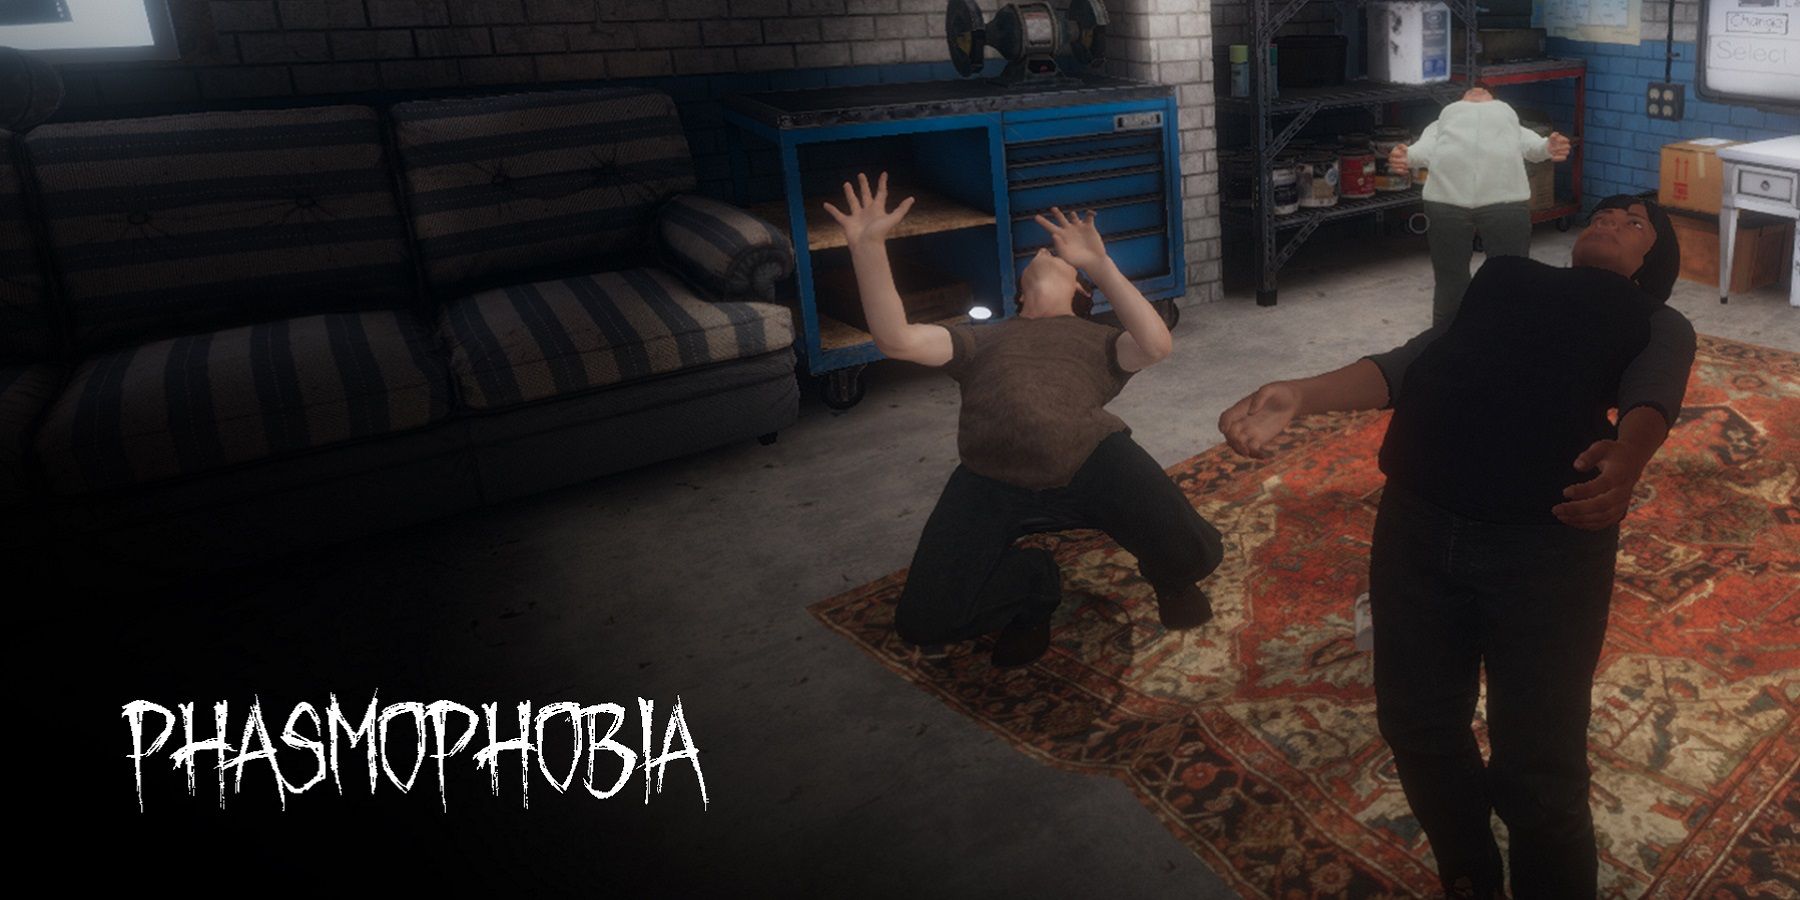 An image from Phasmophobia showing two players looking up with the game's logo in the left corner.